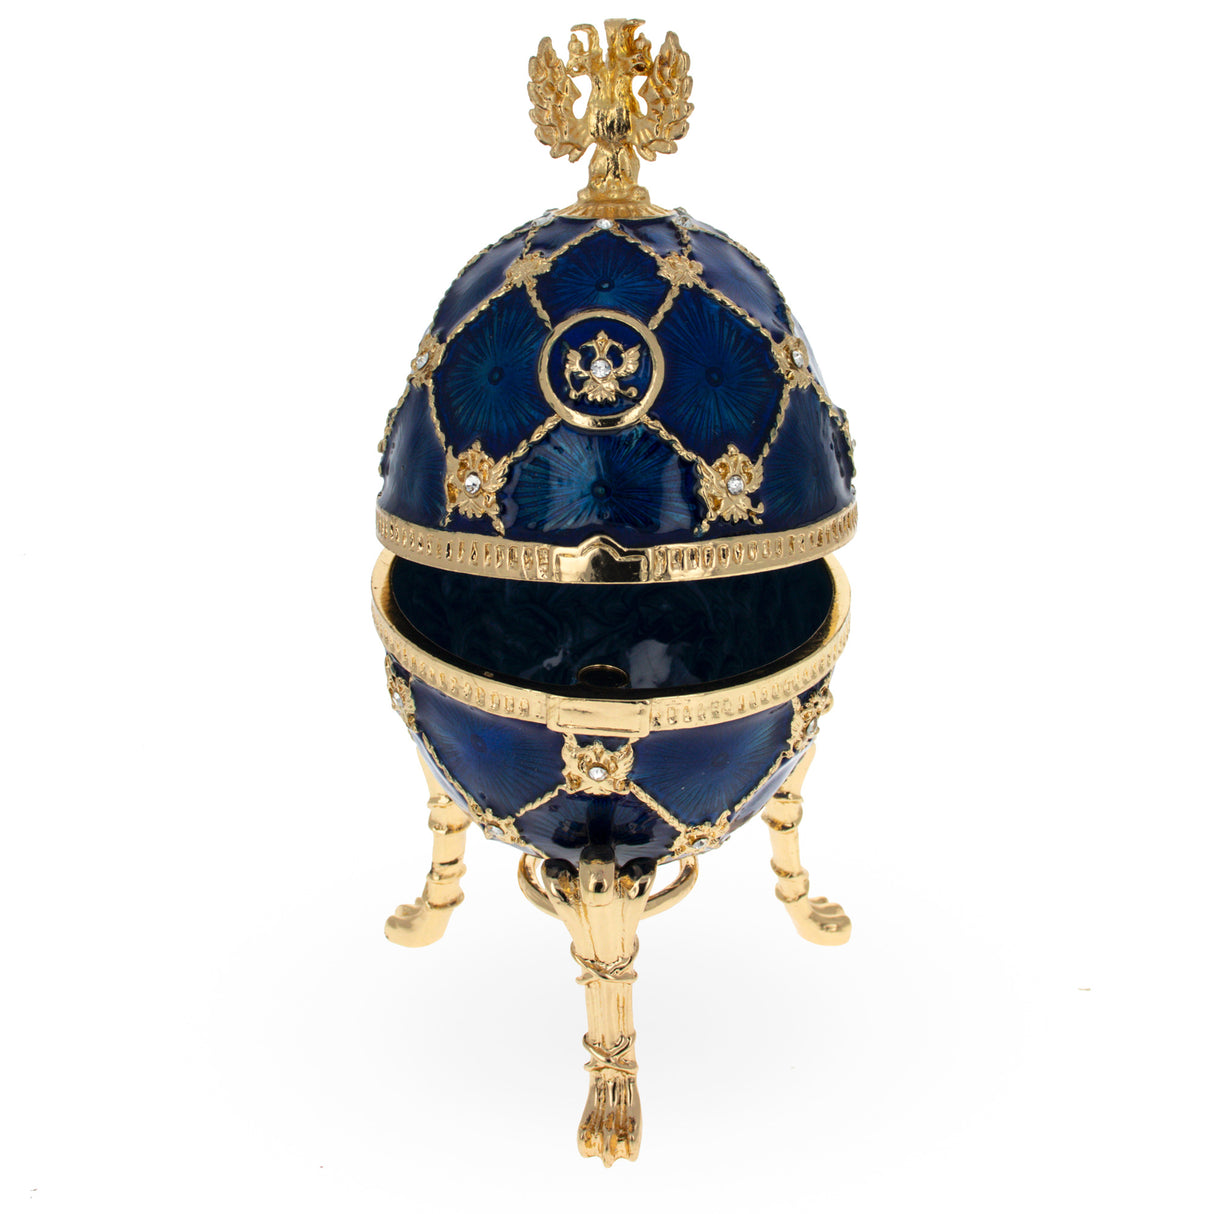 Coat of Arms Blue Royal Inspired Easter Egg ,dimensions in inches: 4.8 x 2.2 x 2.2